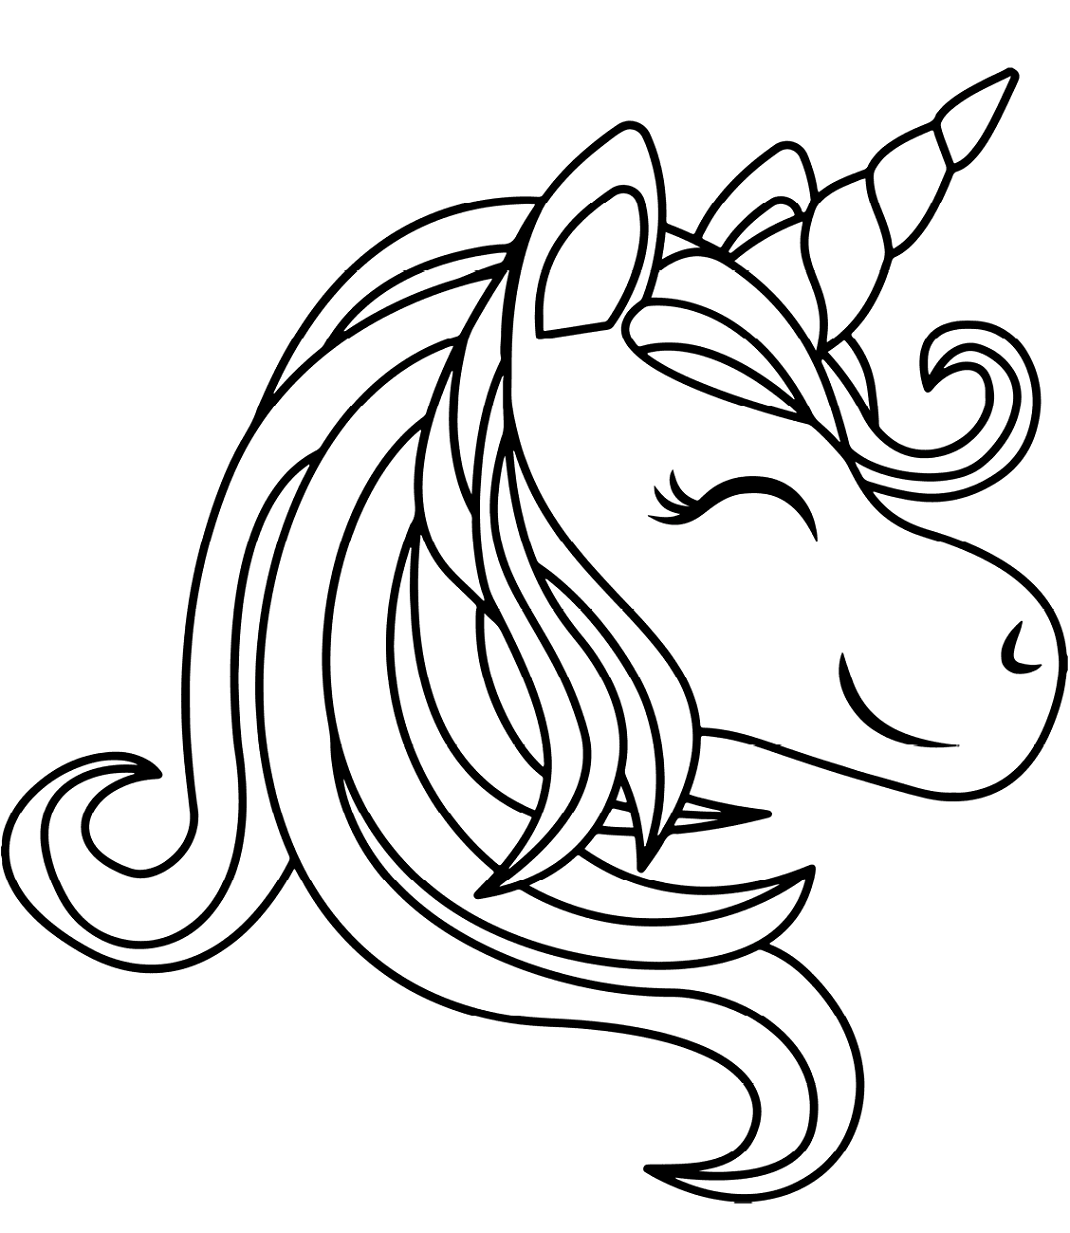 cartoon unicorn coloring pages